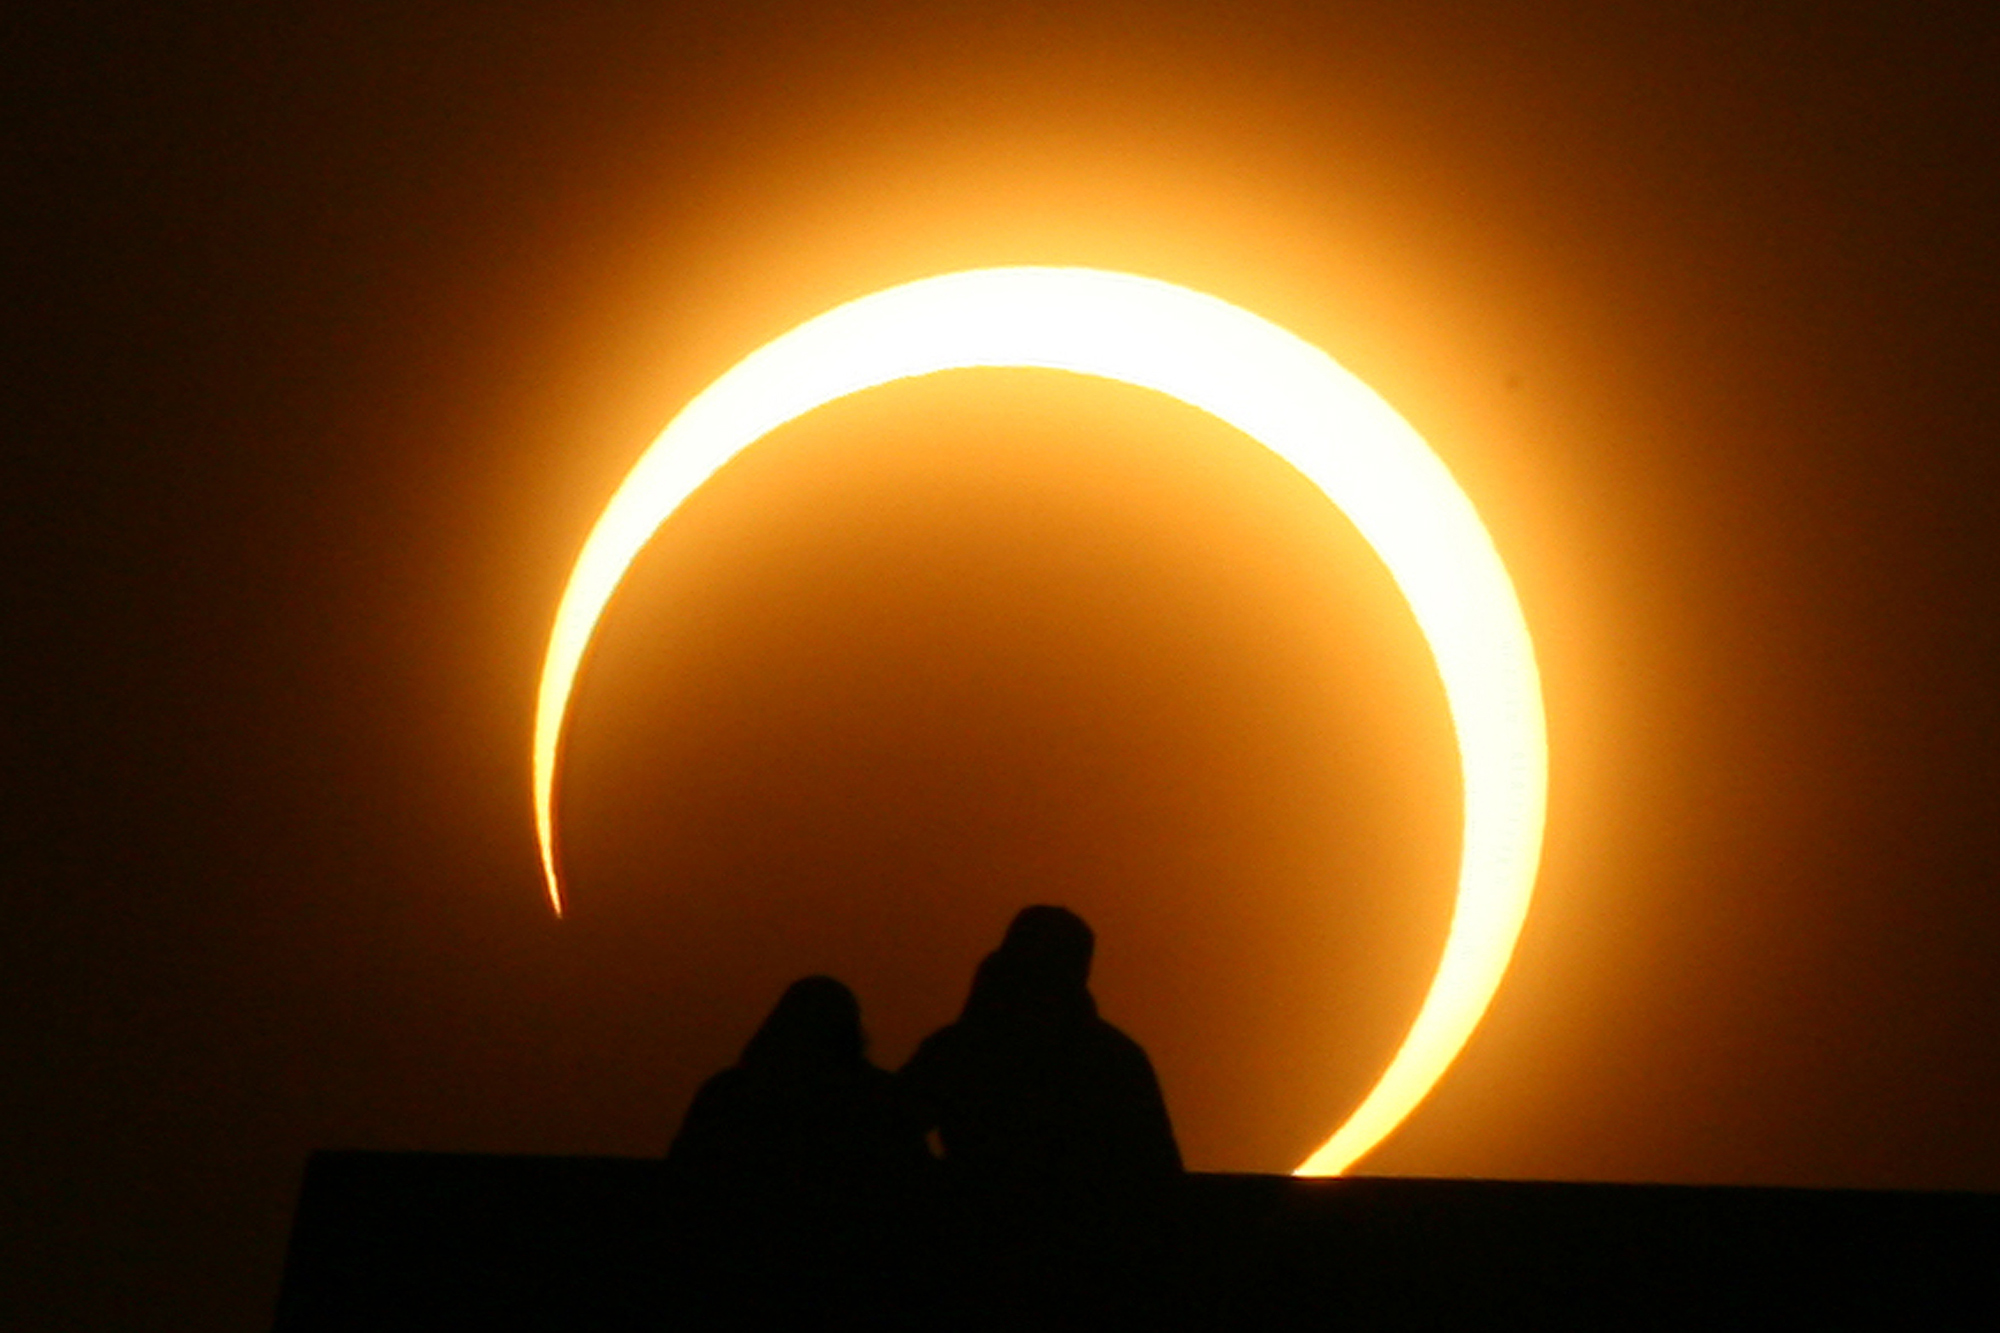 Ring of fire solar eclipse coming Oct. 14 | The Herald Times | Serving  Meeker, Rangely, Dinosaur & Northwest Colorado